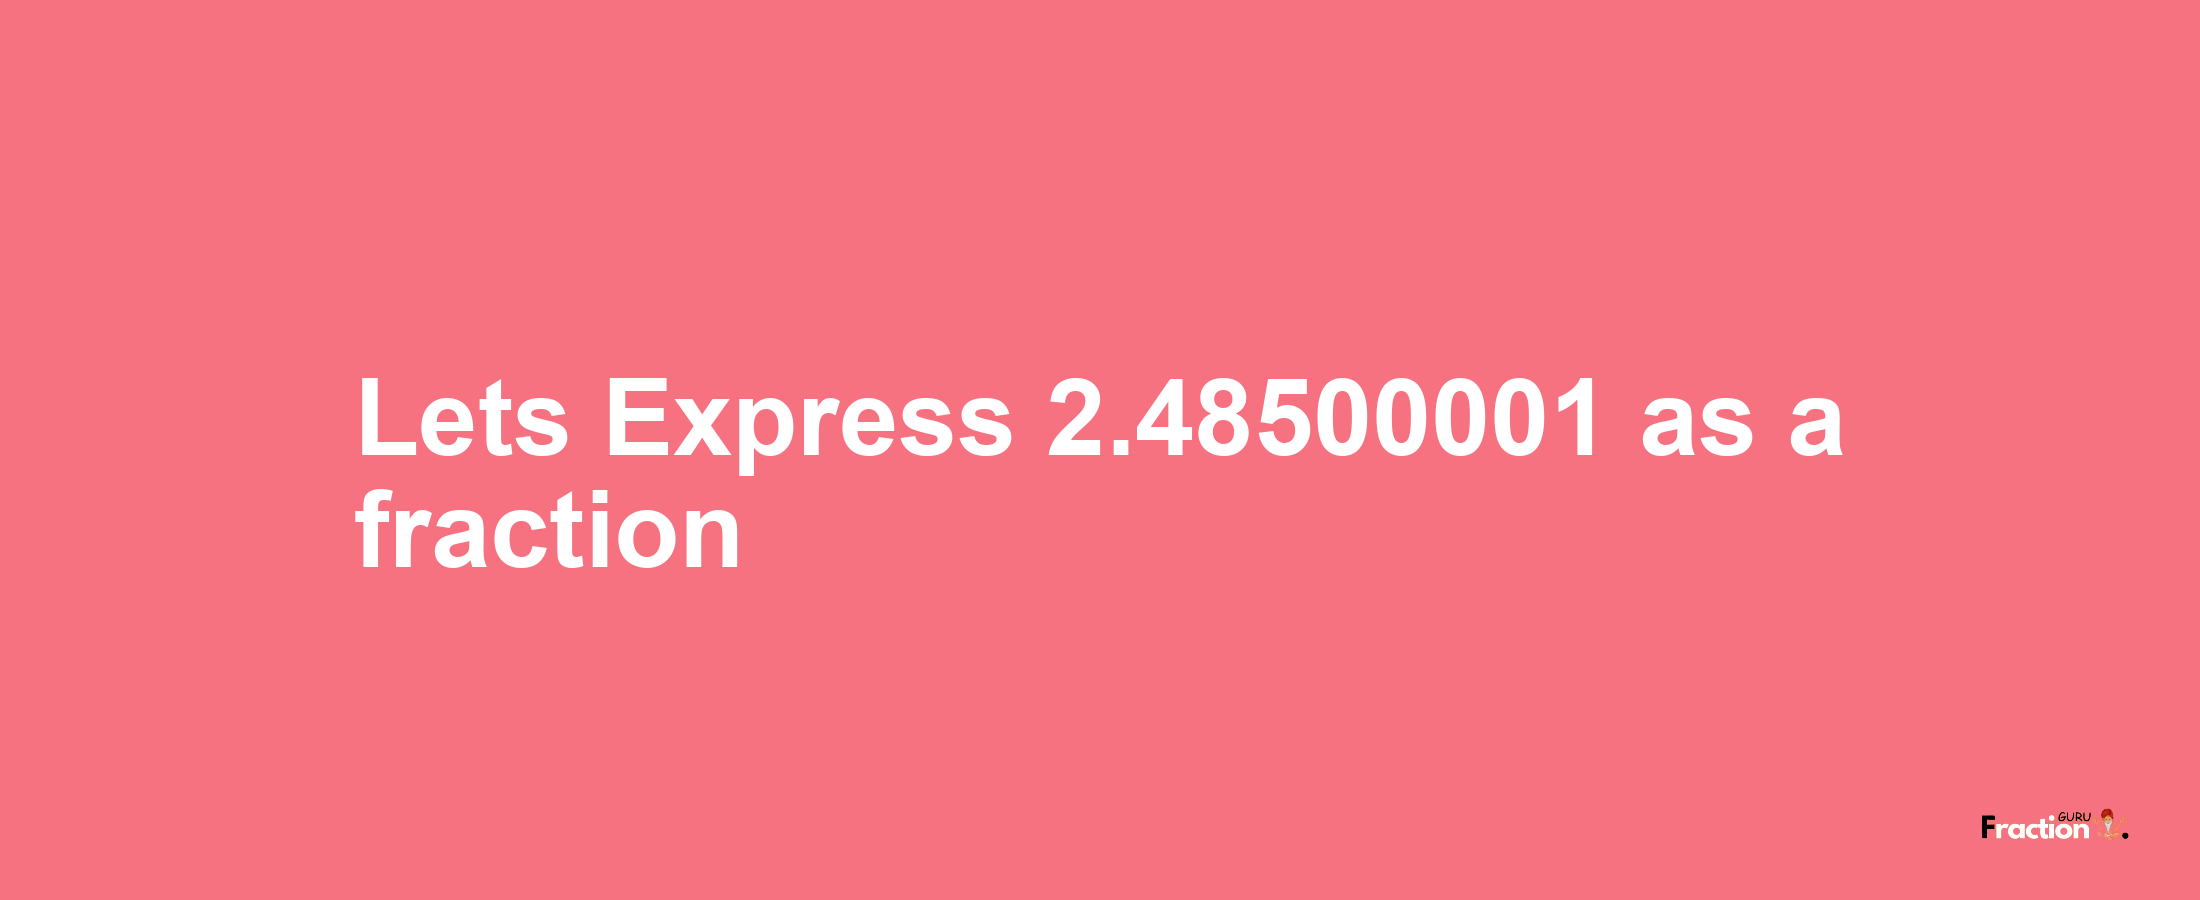 Lets Express 2.48500001 as afraction